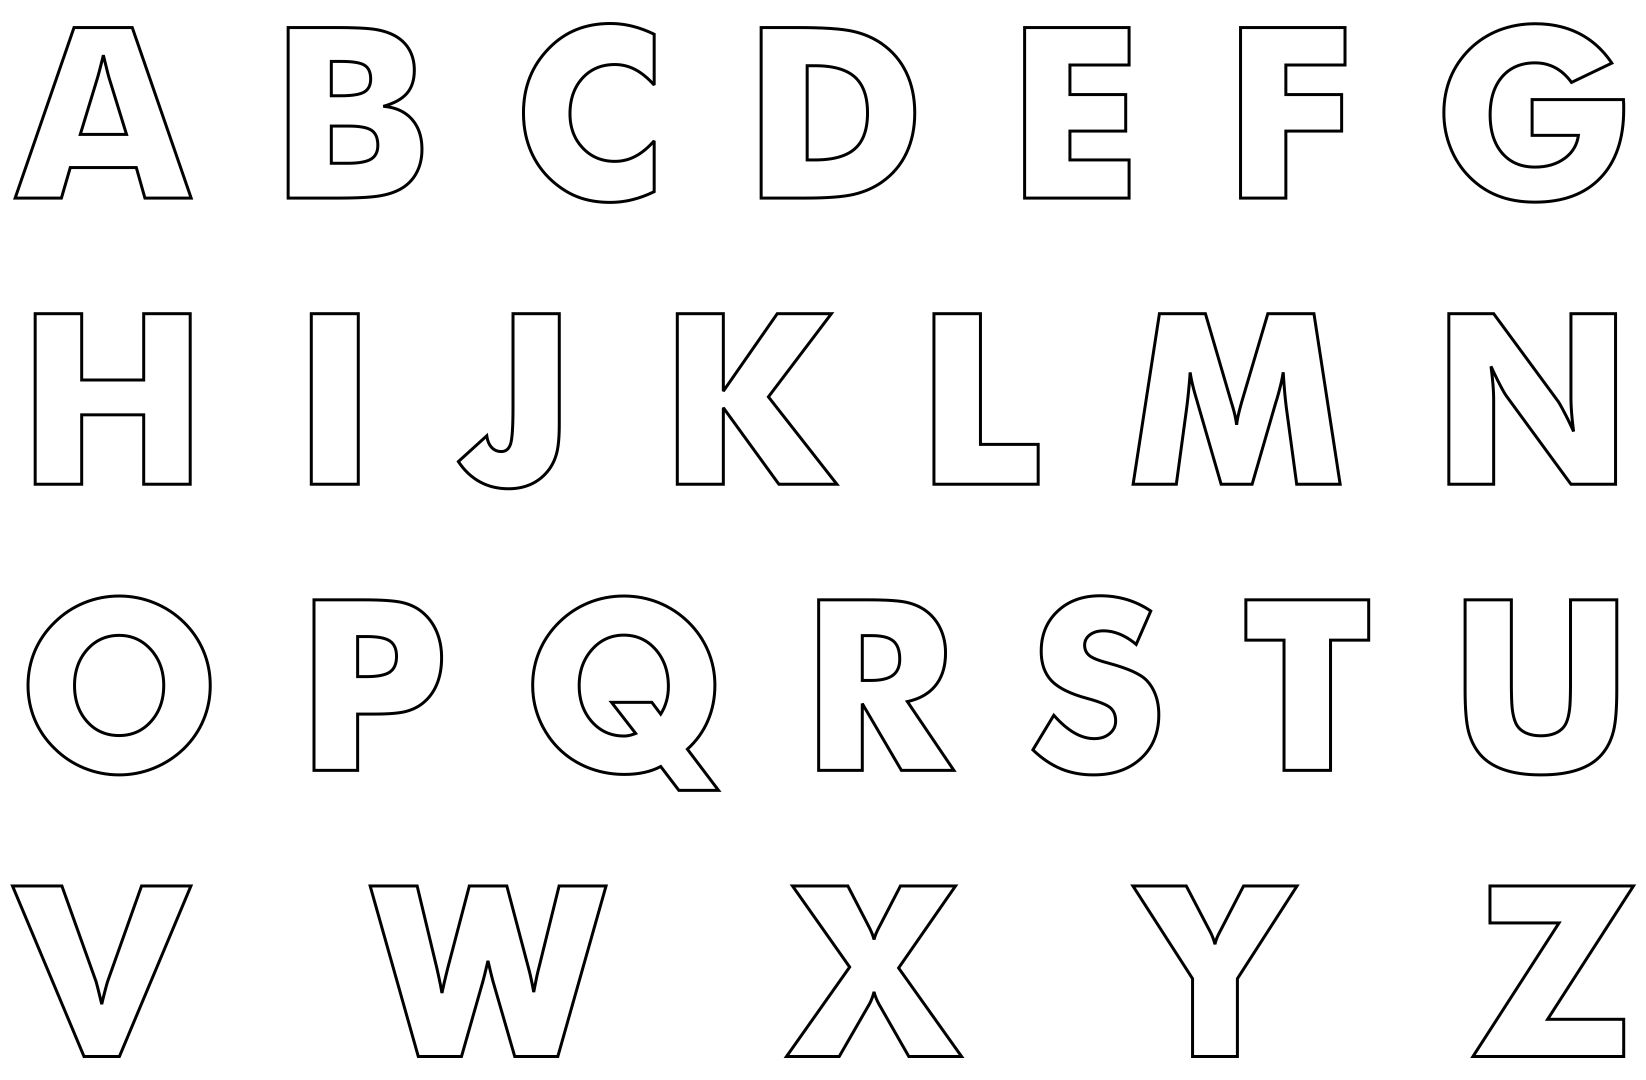 8 Best Images of Free Printable Cut Out Letters Free Cut Out Letters